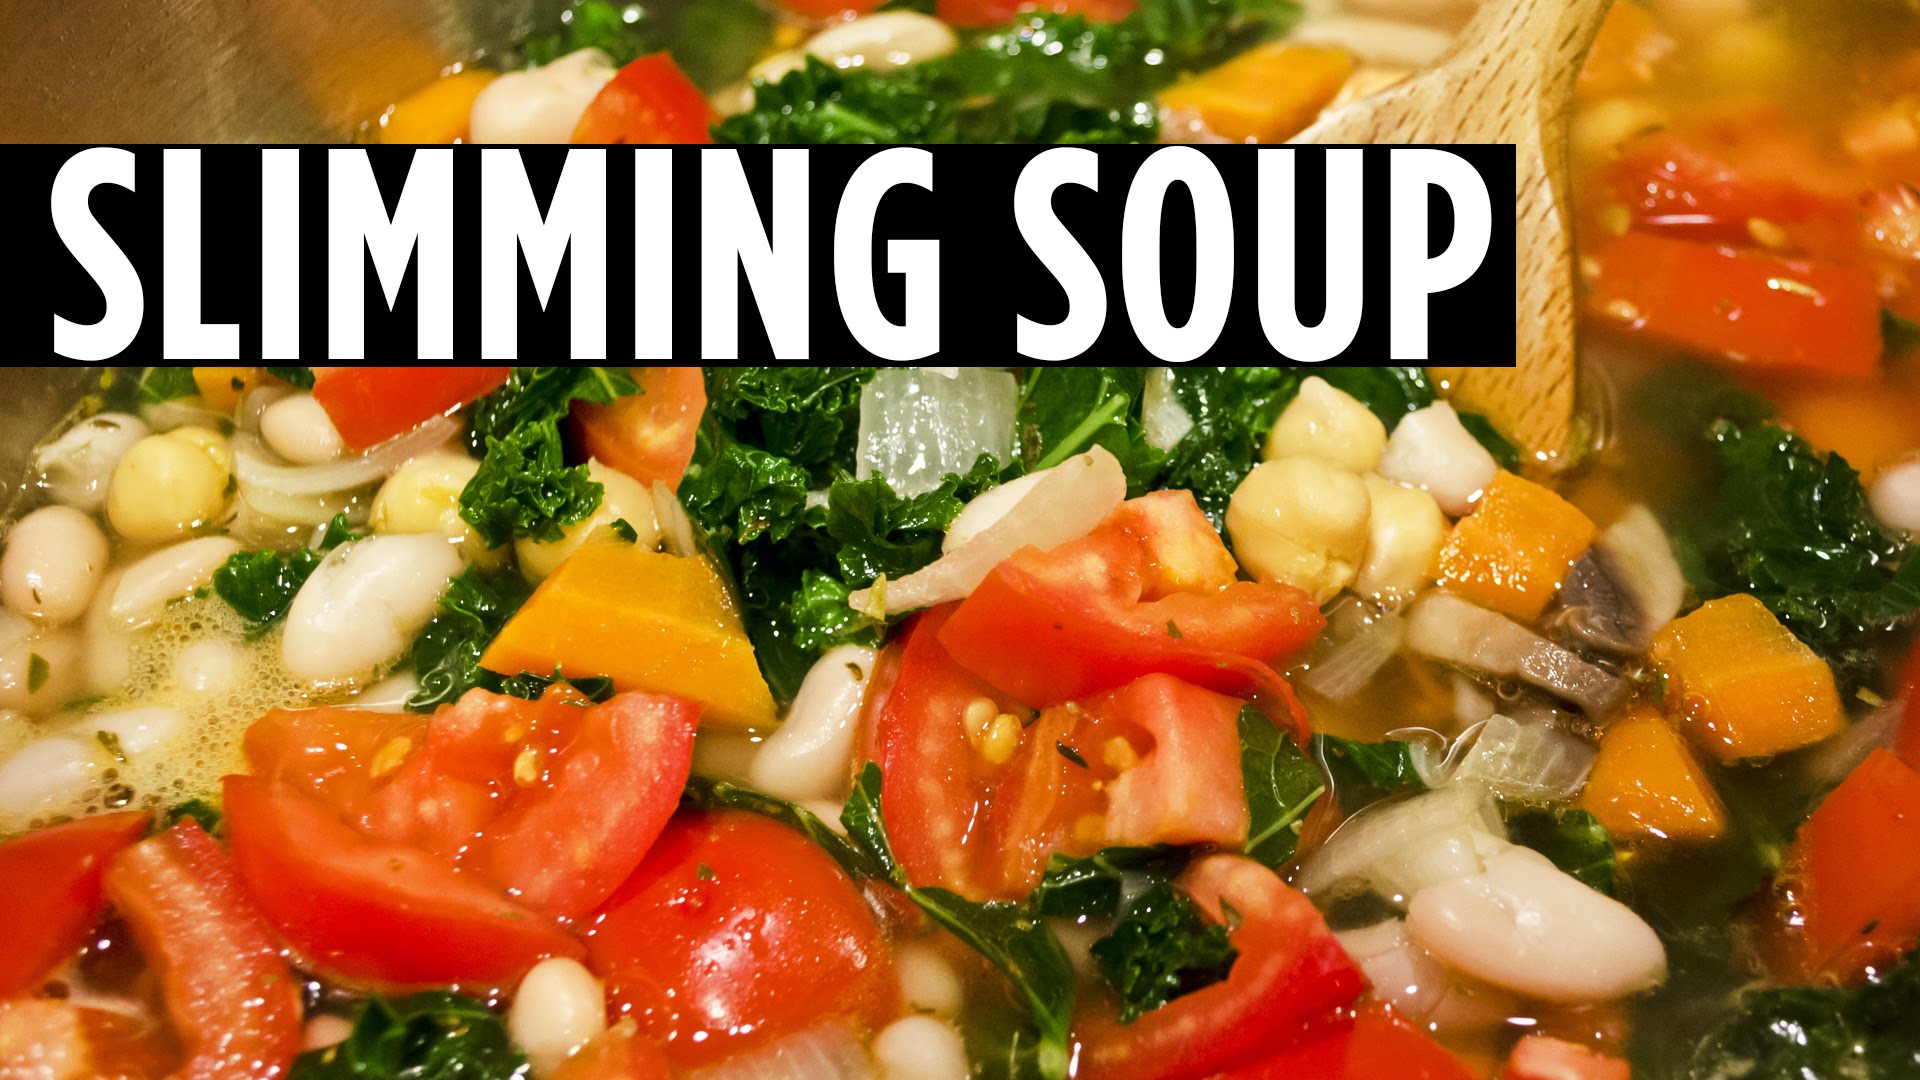 Lose Weight With This Slimming Soup Recipe (7 Day Diet